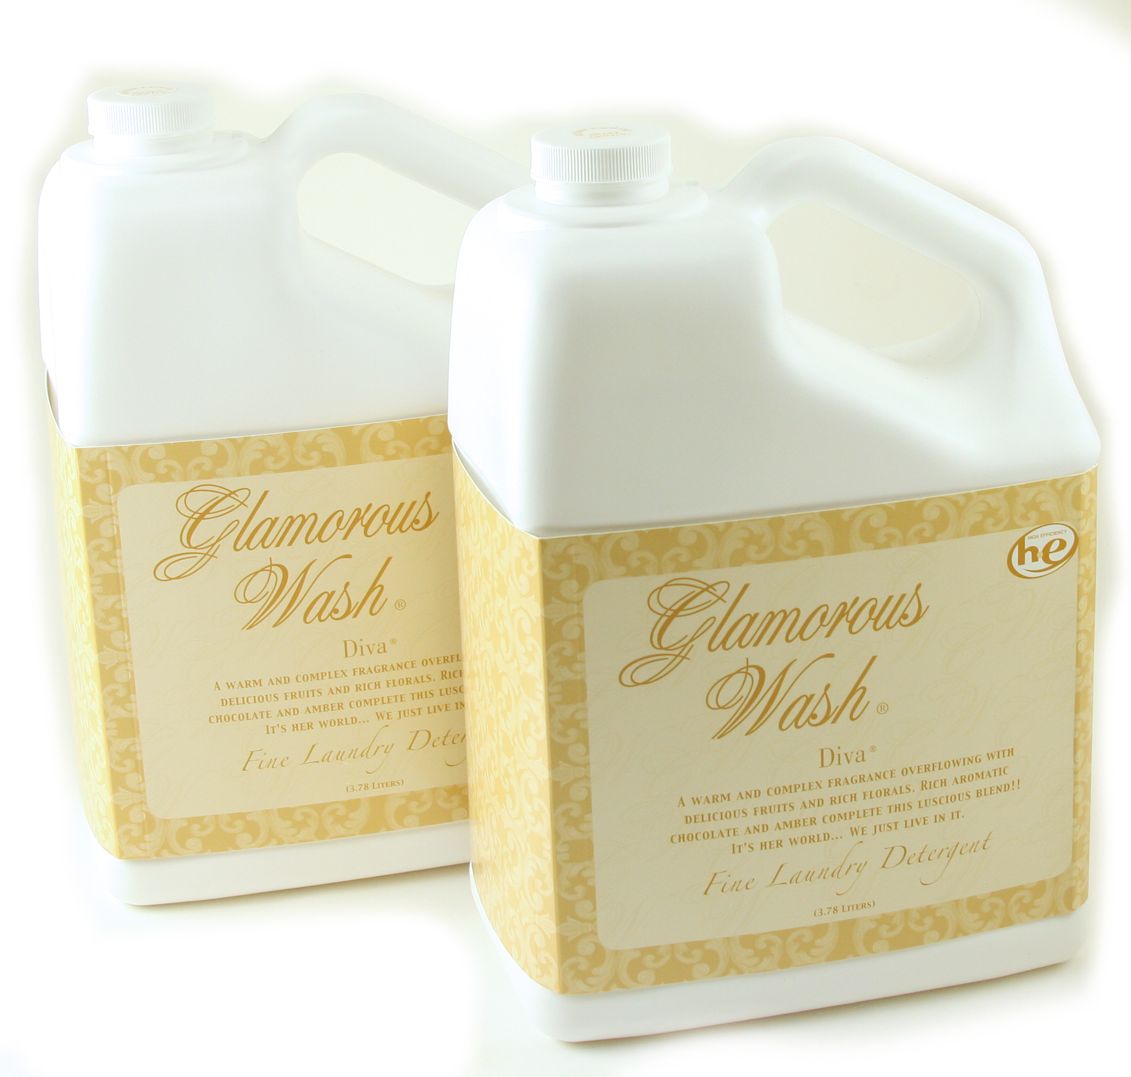 TYLER FRAGRANCE TWO GALLON SET Glamorous Wash Fine Laundry Detergent by Tyler Candles